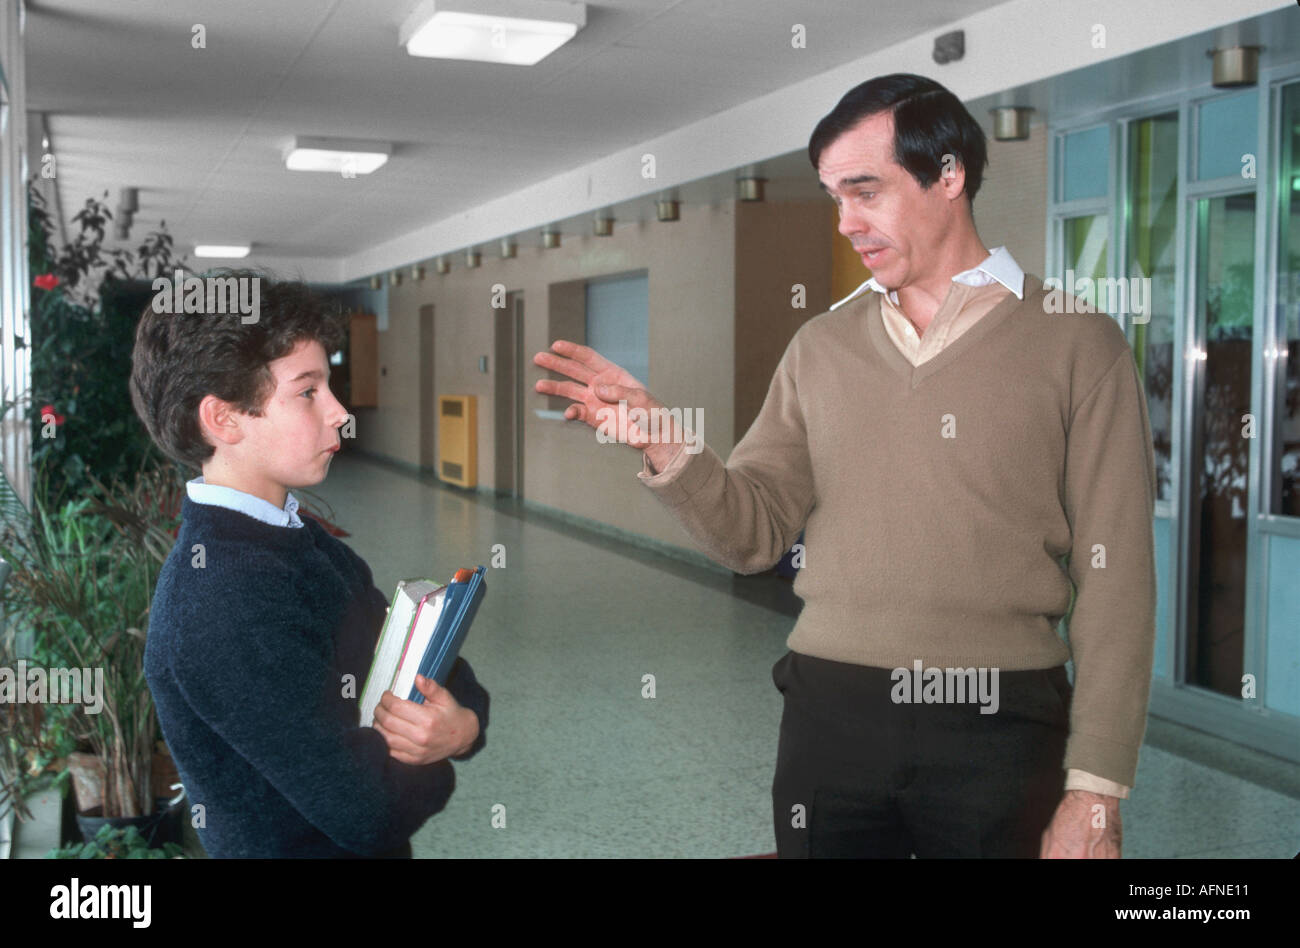 Teacher scolds student in the hall between classes Stock Photo